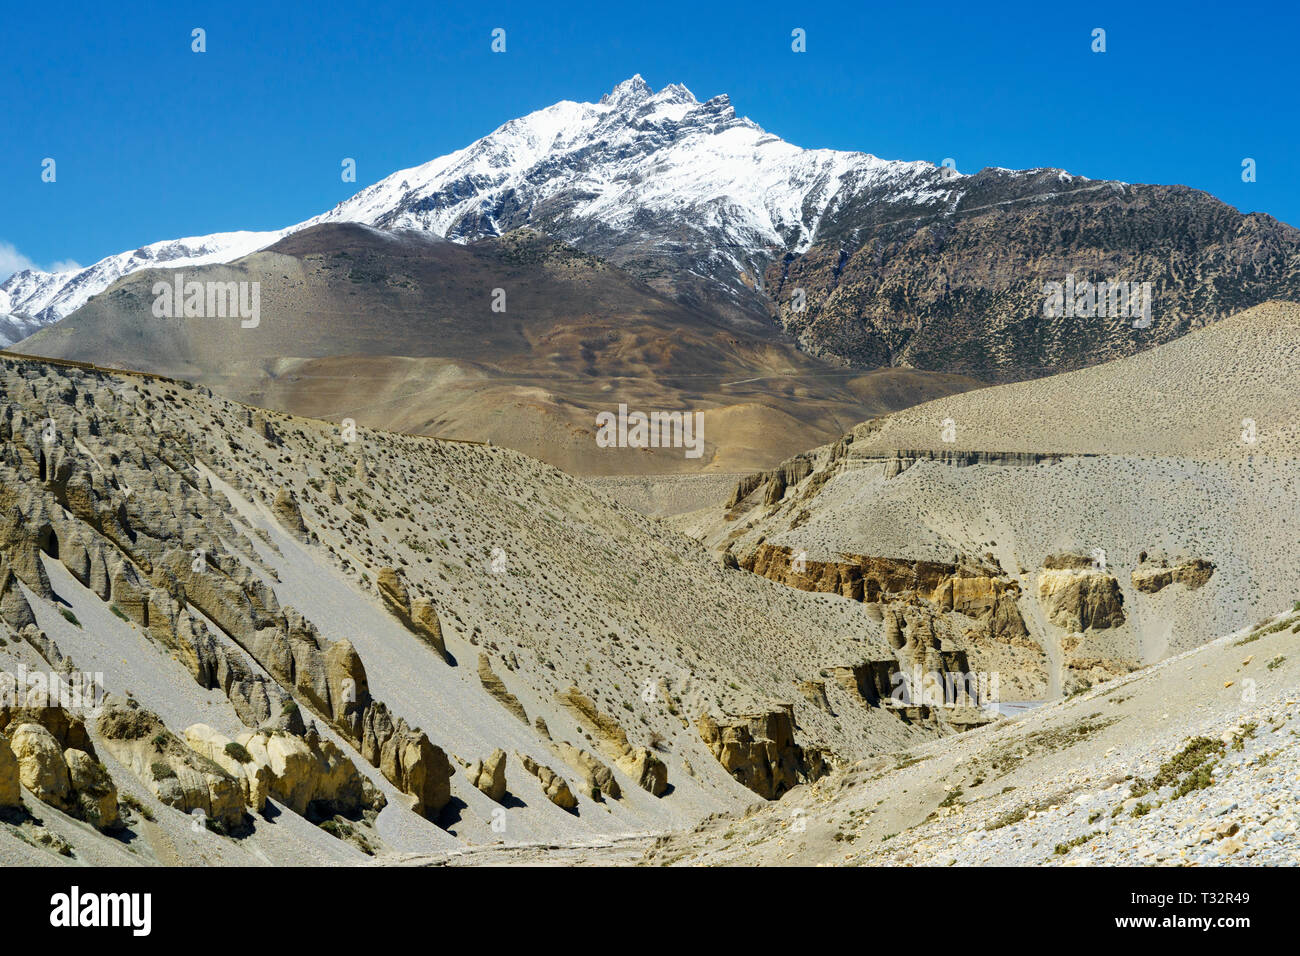 Desertic scenery and snow capped mountain between Tangbe and Chuksang, Upper Mustang region, Nepal Stock Photo